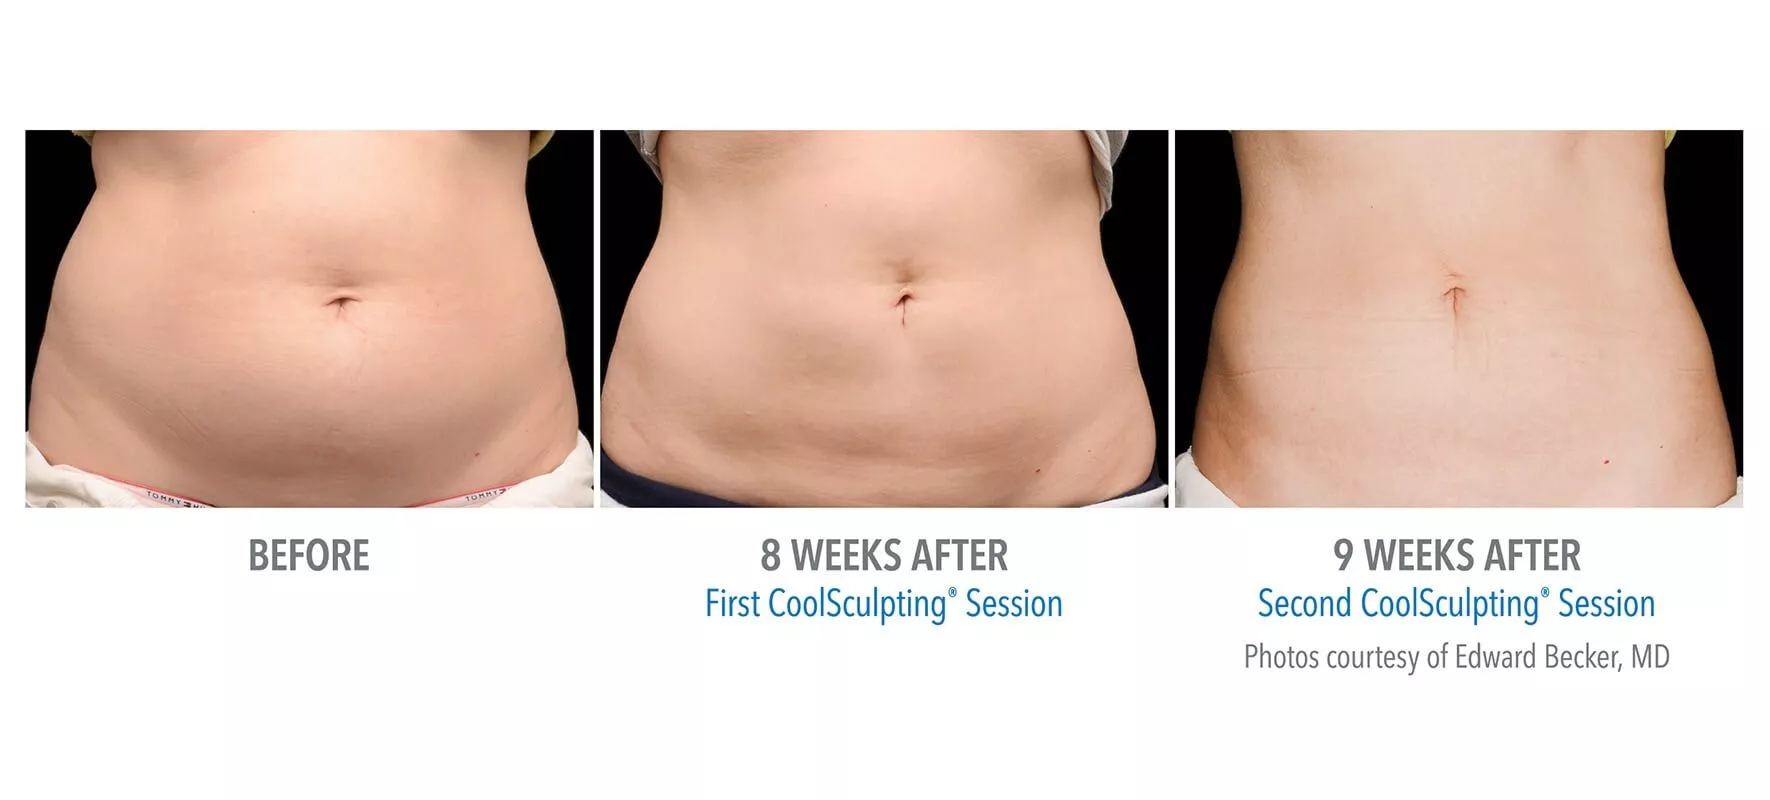 Female CoolSculpting patient in Las Vegas. Before and after photos of abs post first and second CoolSculpting treatments.